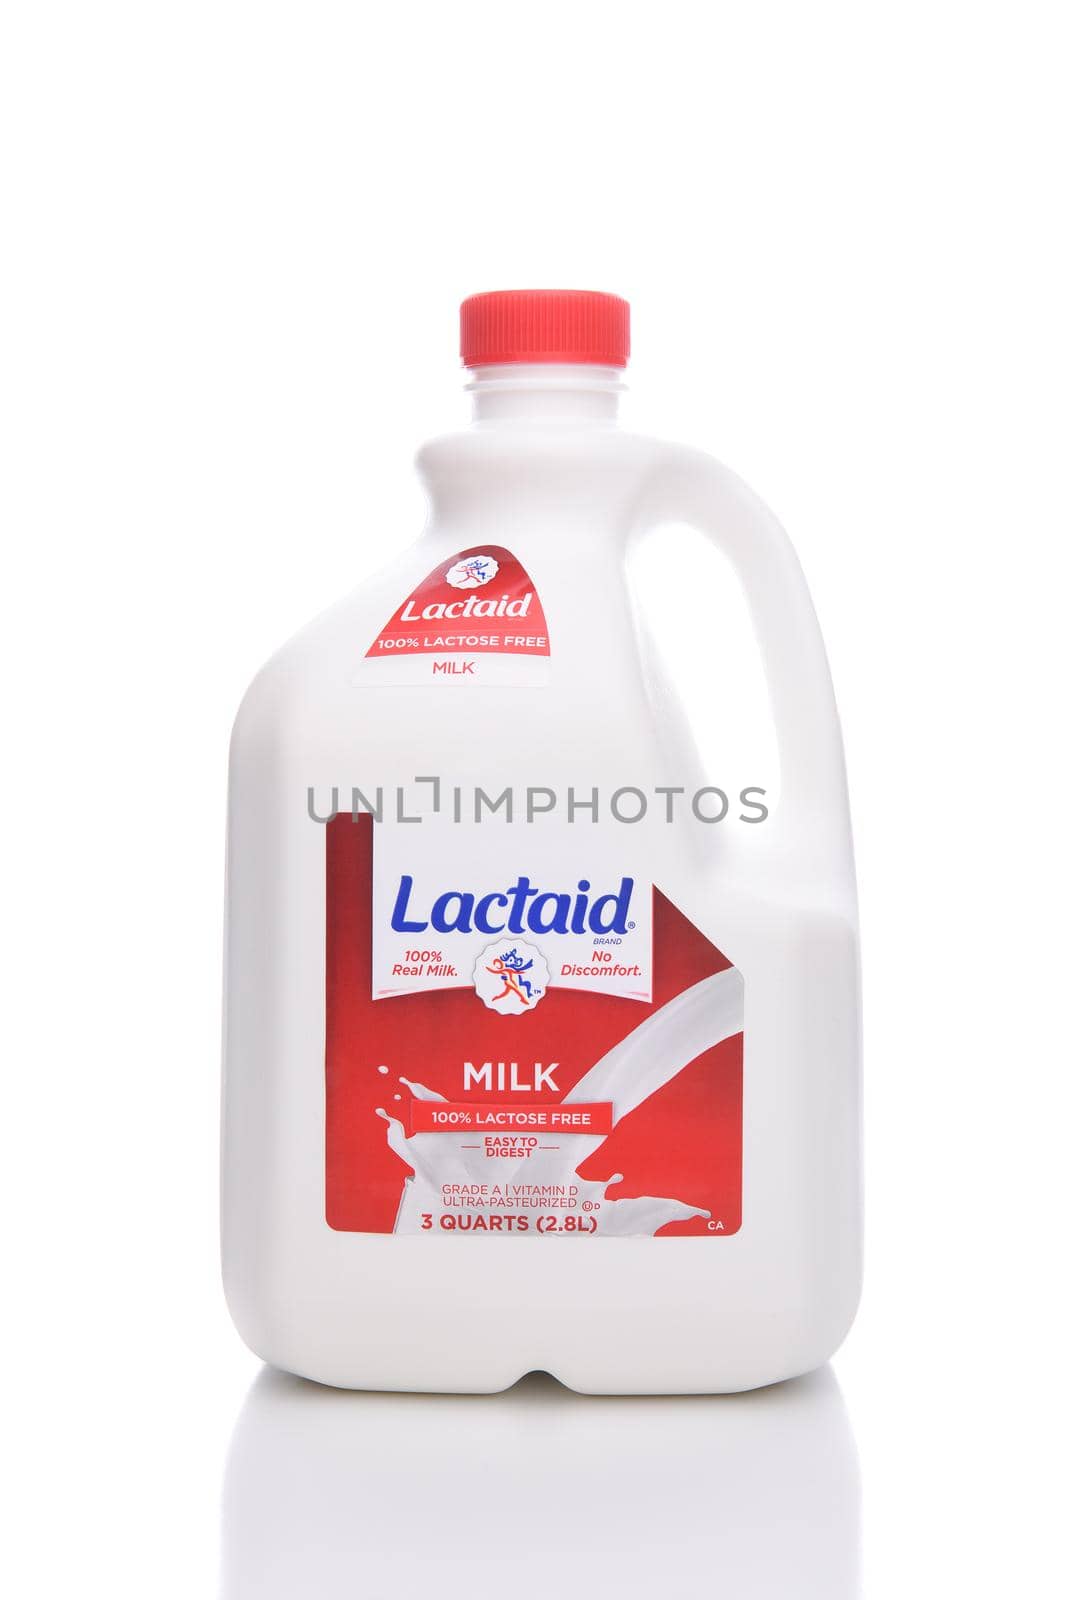 IRVINE, CALIFORNIA - JANUARY 22, 2017: A 3 Quart Bottle of Lactaid Lactose Free Milk. Lactaid makes a full line of lactose free dairy products that can be enjoyed without stomach discomfort.